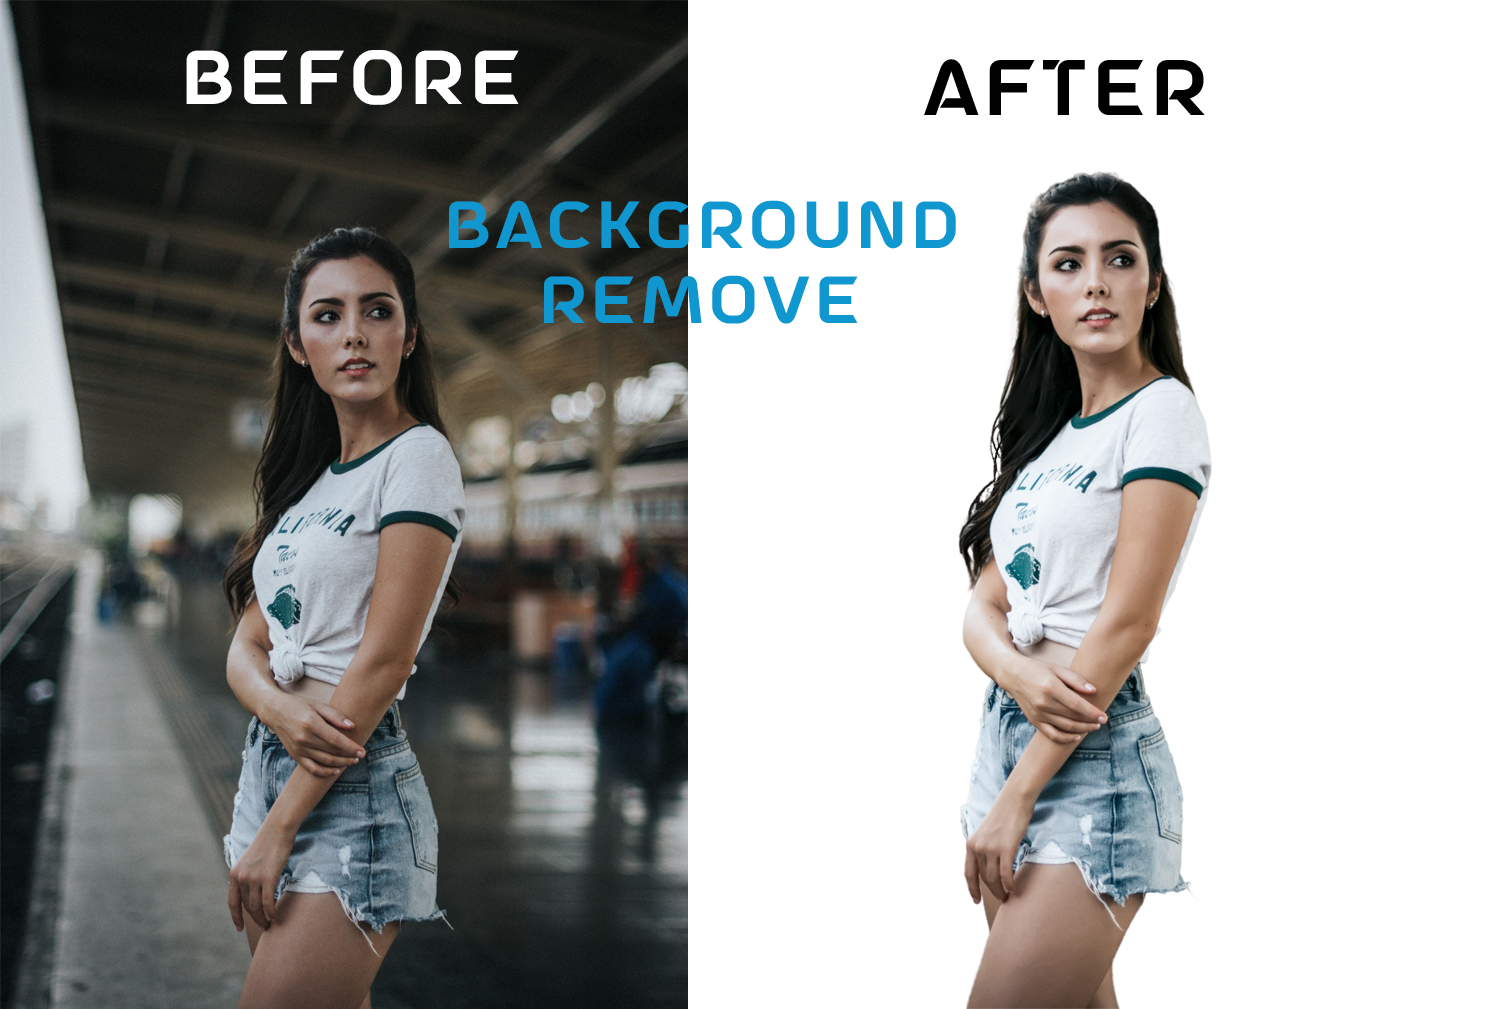 I will do background remove and change in time for $1 - SEOClerks